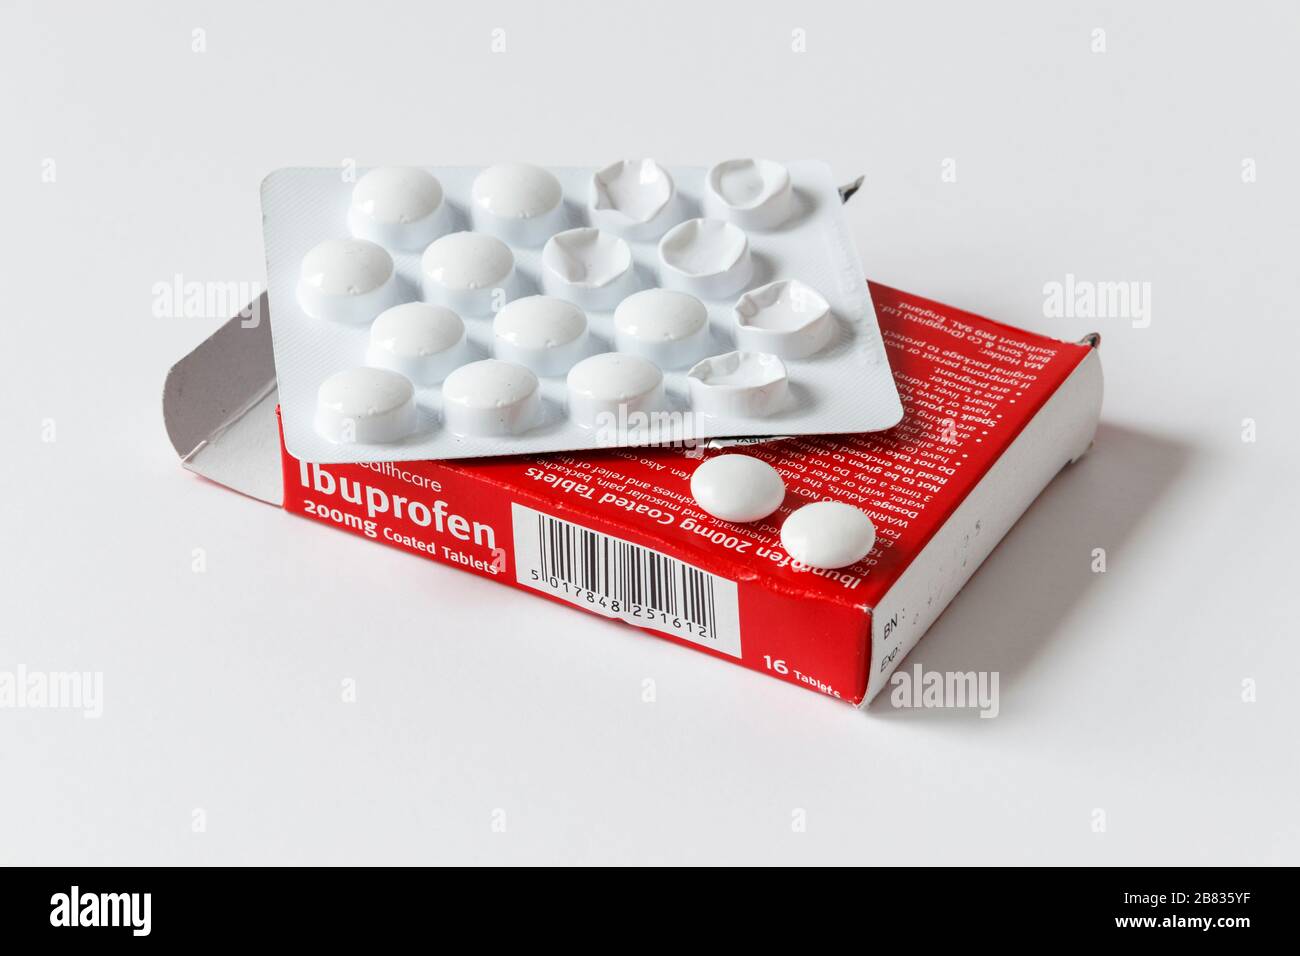 Ibuprofen tablets in a blister pack, two tablets removed, against a plain white background Stock Photo